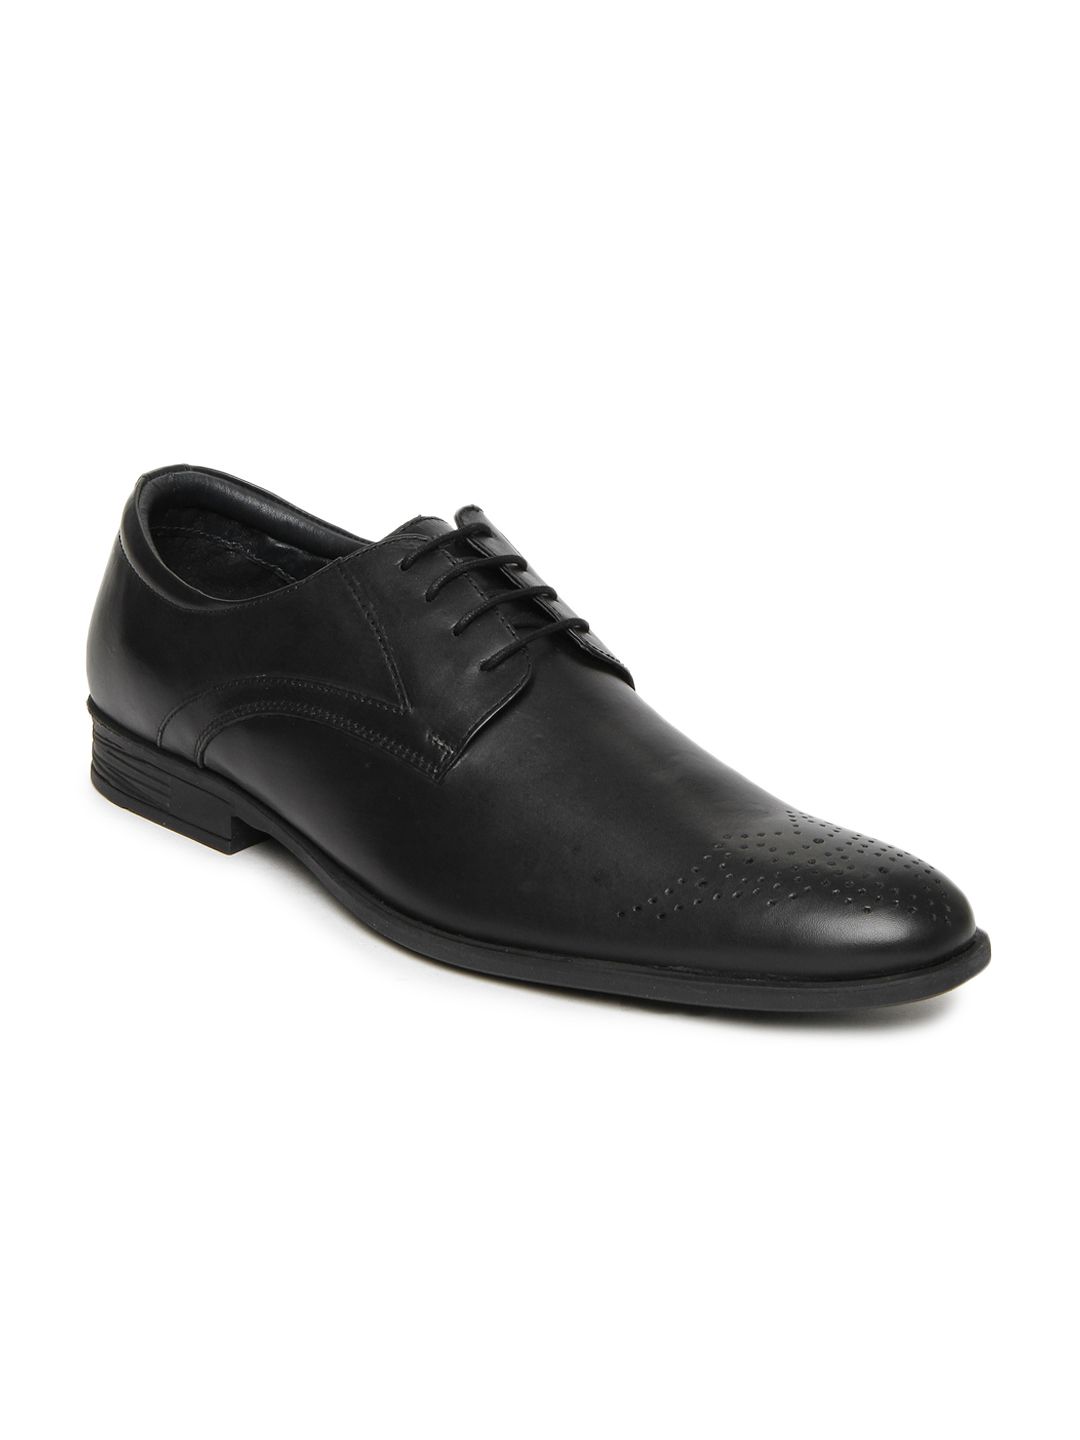 Buy Hush Puppies Men Black Leather Formal Shoes - 633 - Footwear for ...